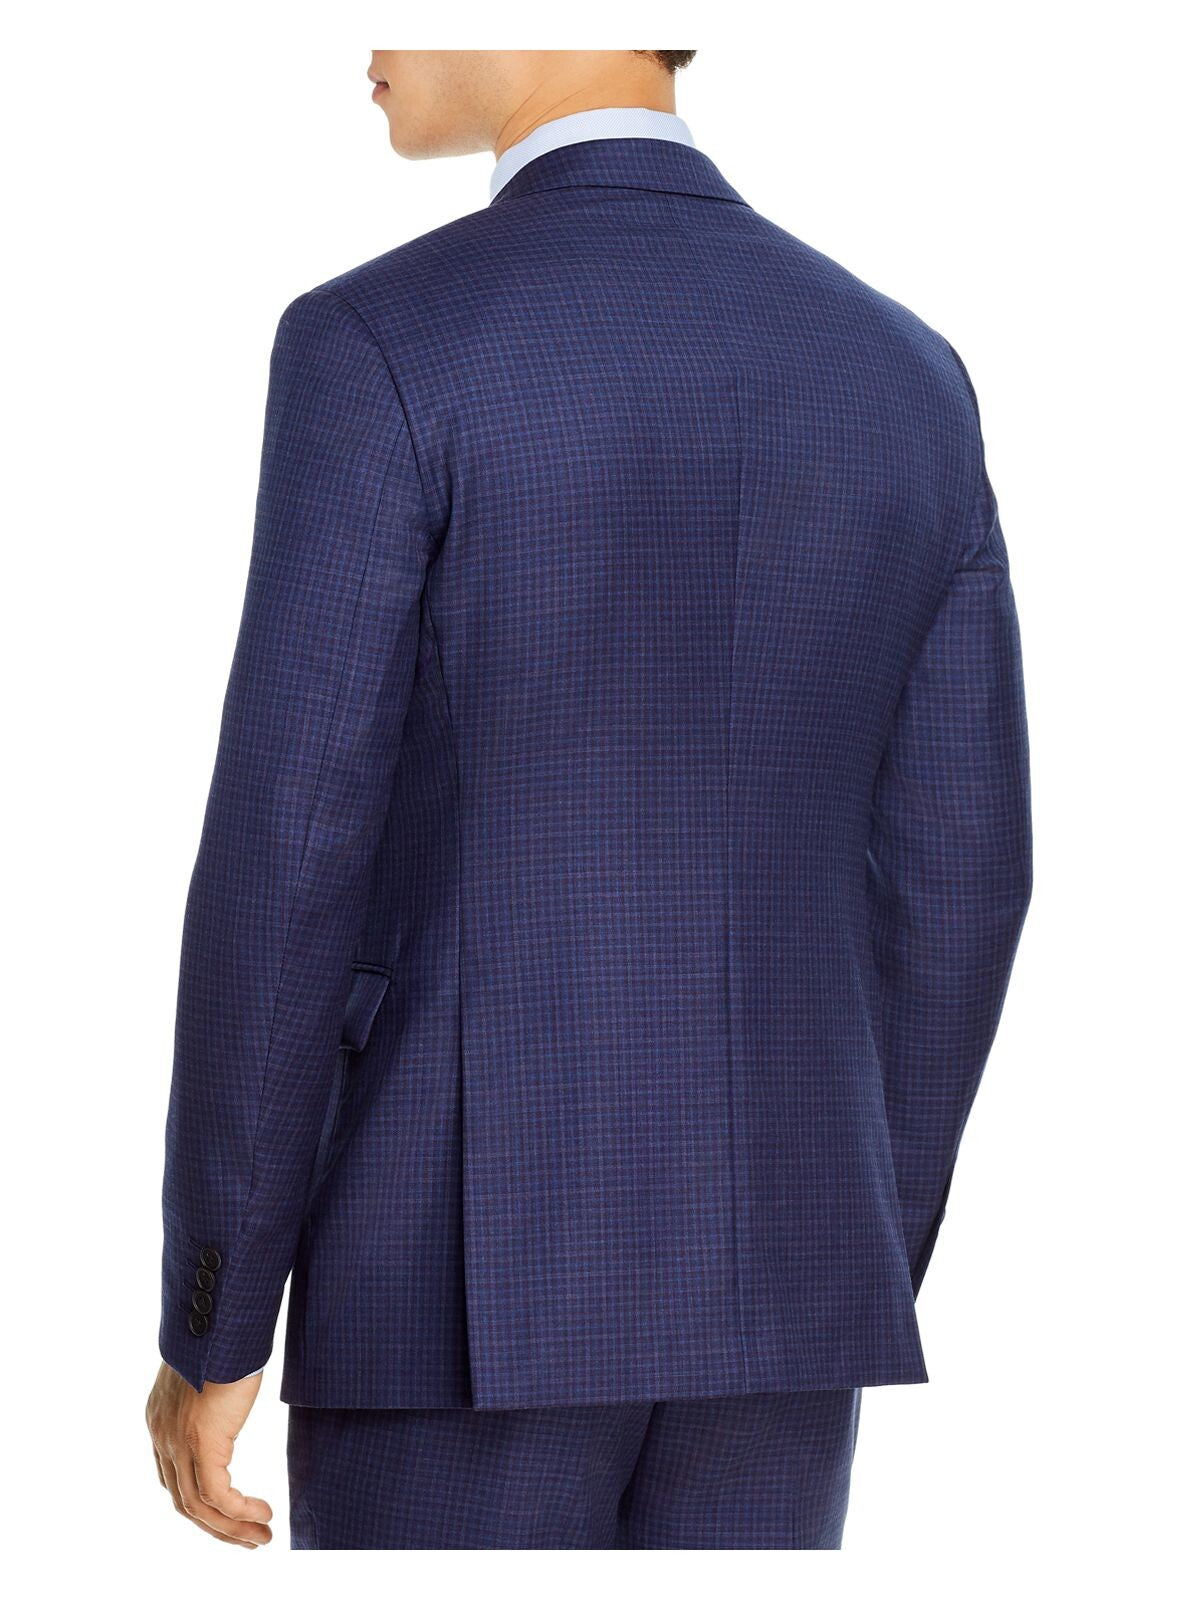 THEORY Mens Bowery Blue Single Breasted, Extra Slim Fit Wool Blend Suit Separate Blazer Jacket 40R